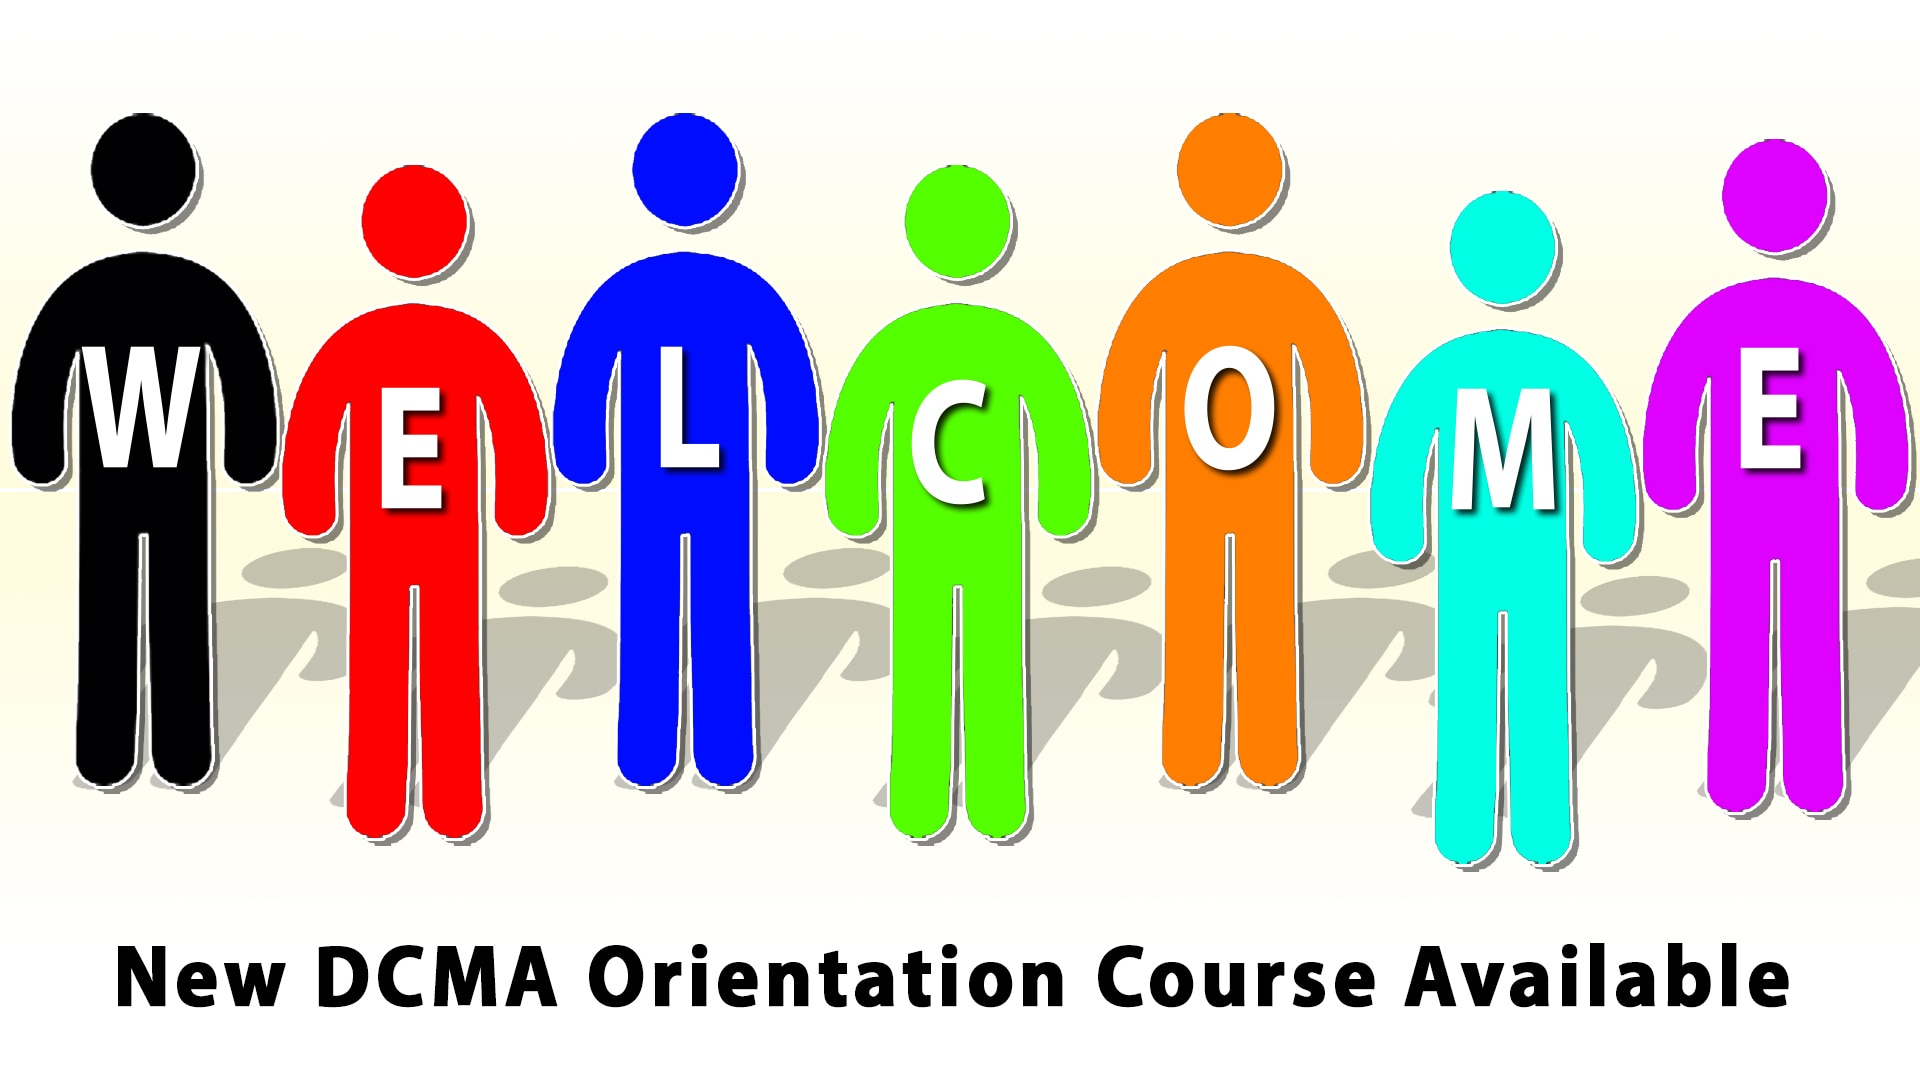 New DCMA Orientation Course Available